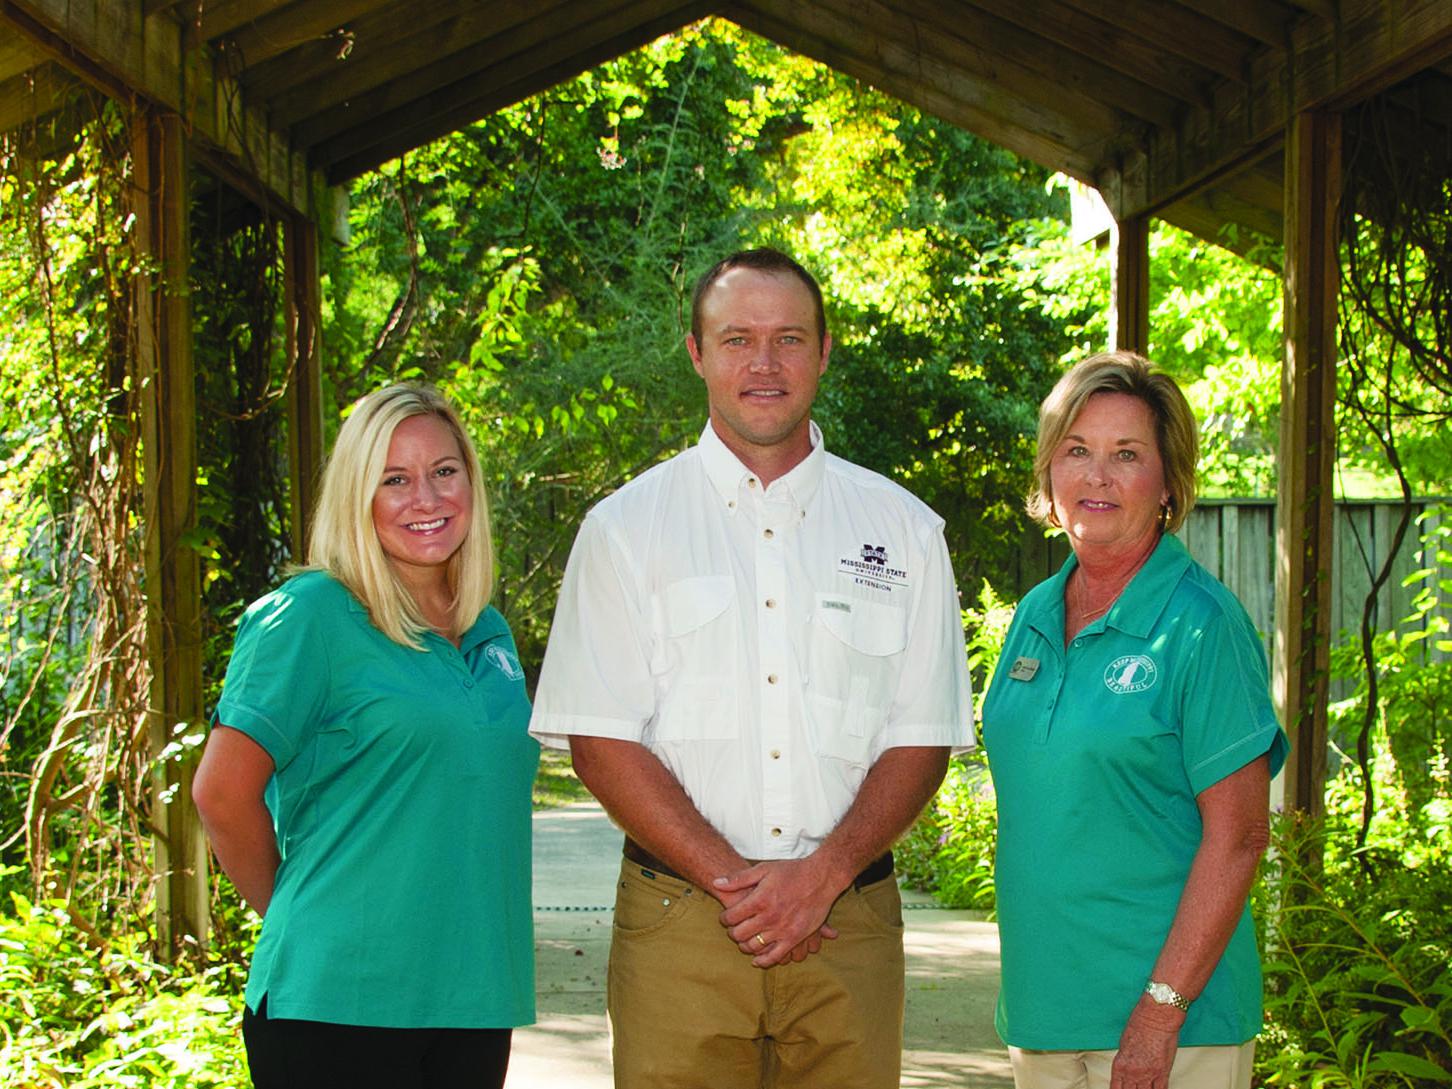 Brett Rushing, an assistant Extension and research professor at the Mississippi State University Coastal Plain Branch Experiment Station, works with Neeley Norman, left, and Sarah Kountouris on the Wildflower Trails of Mississippi, a program coordinated by Keep Mississippi Beautiful intended to turn Mississippi roadsides into pollinator habitats and tourist attractions. Norman is assistant director of Keep Mississippi Beautiful, and Kountouris is director. (Photo by MSU Extension Service/Kat Lawrence)